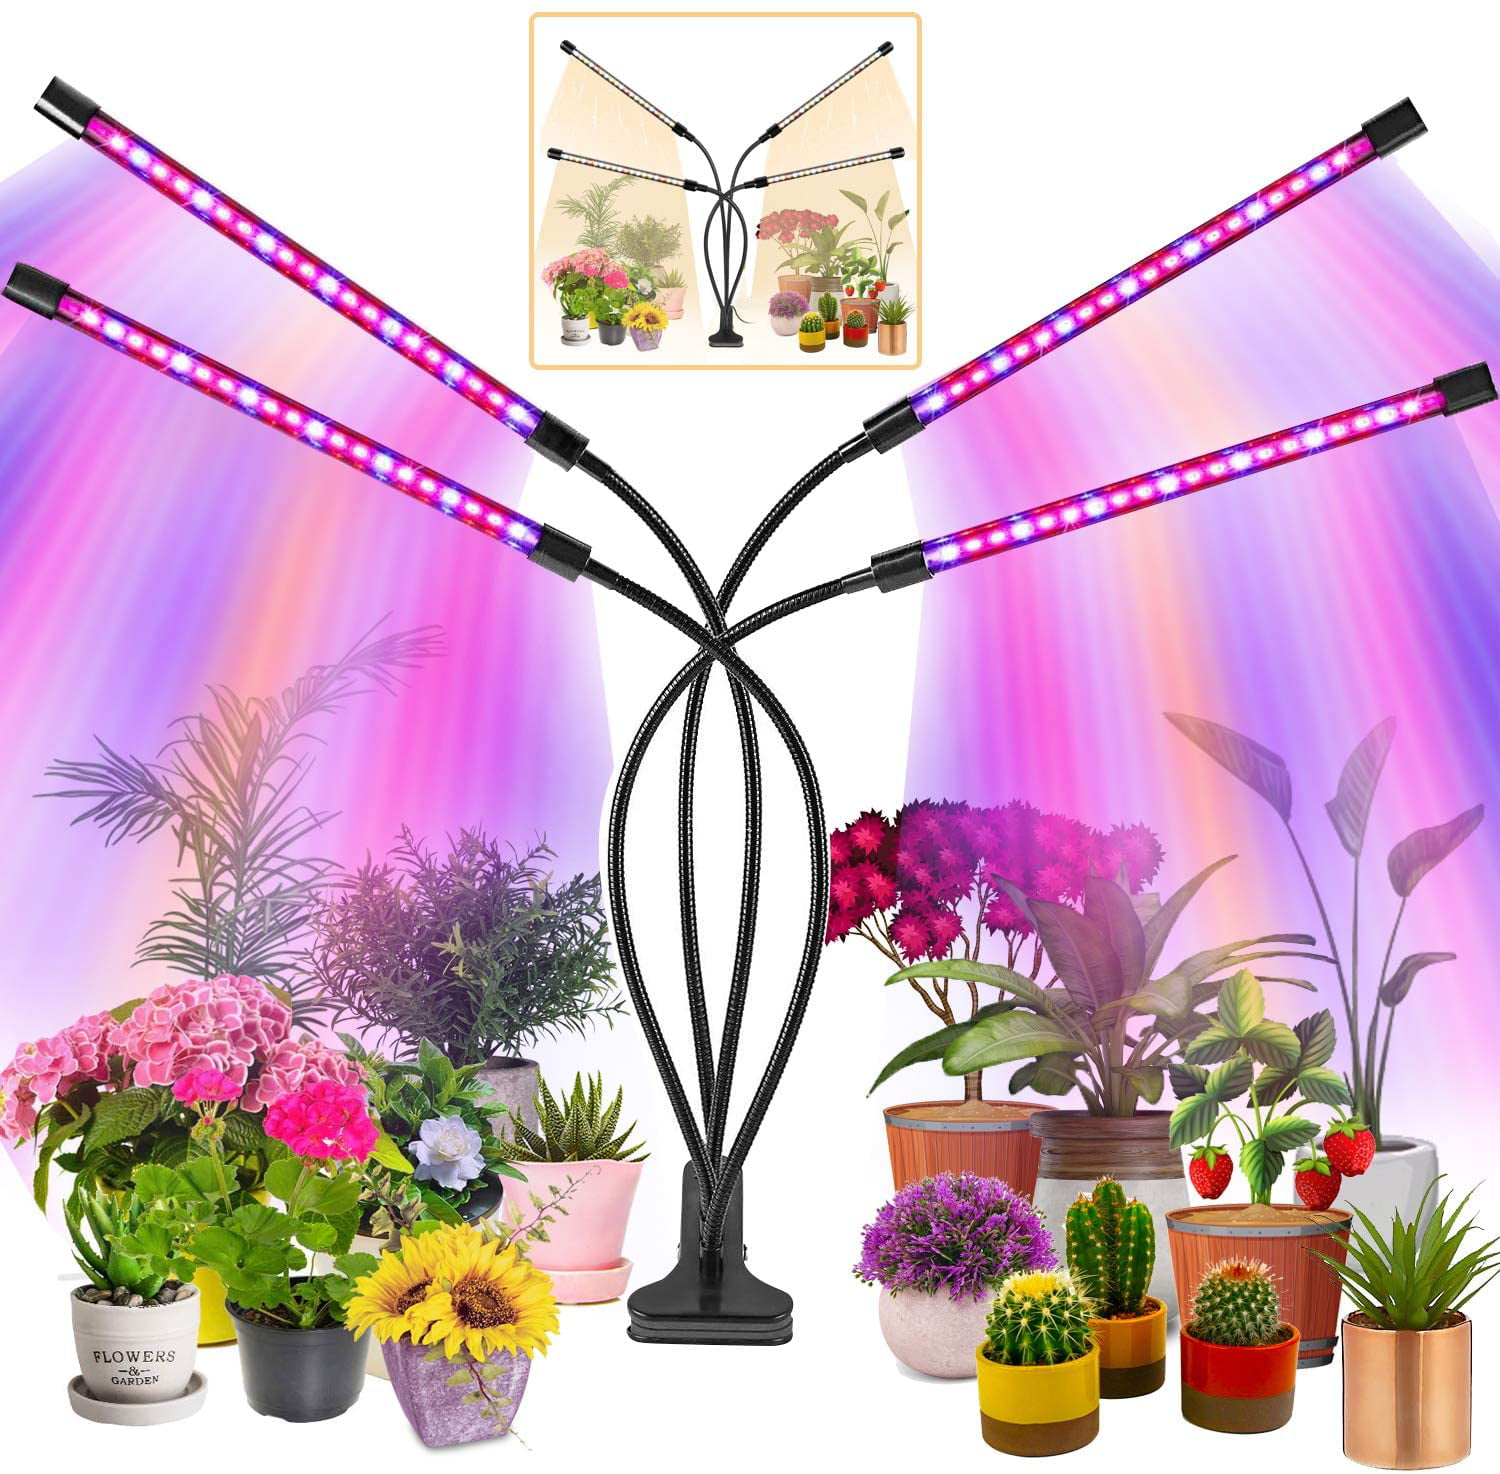 Details about   4-Head LED Plant Grow Lights Flower Indoor Greenhouse Hydroponic Lamp Garden B4 